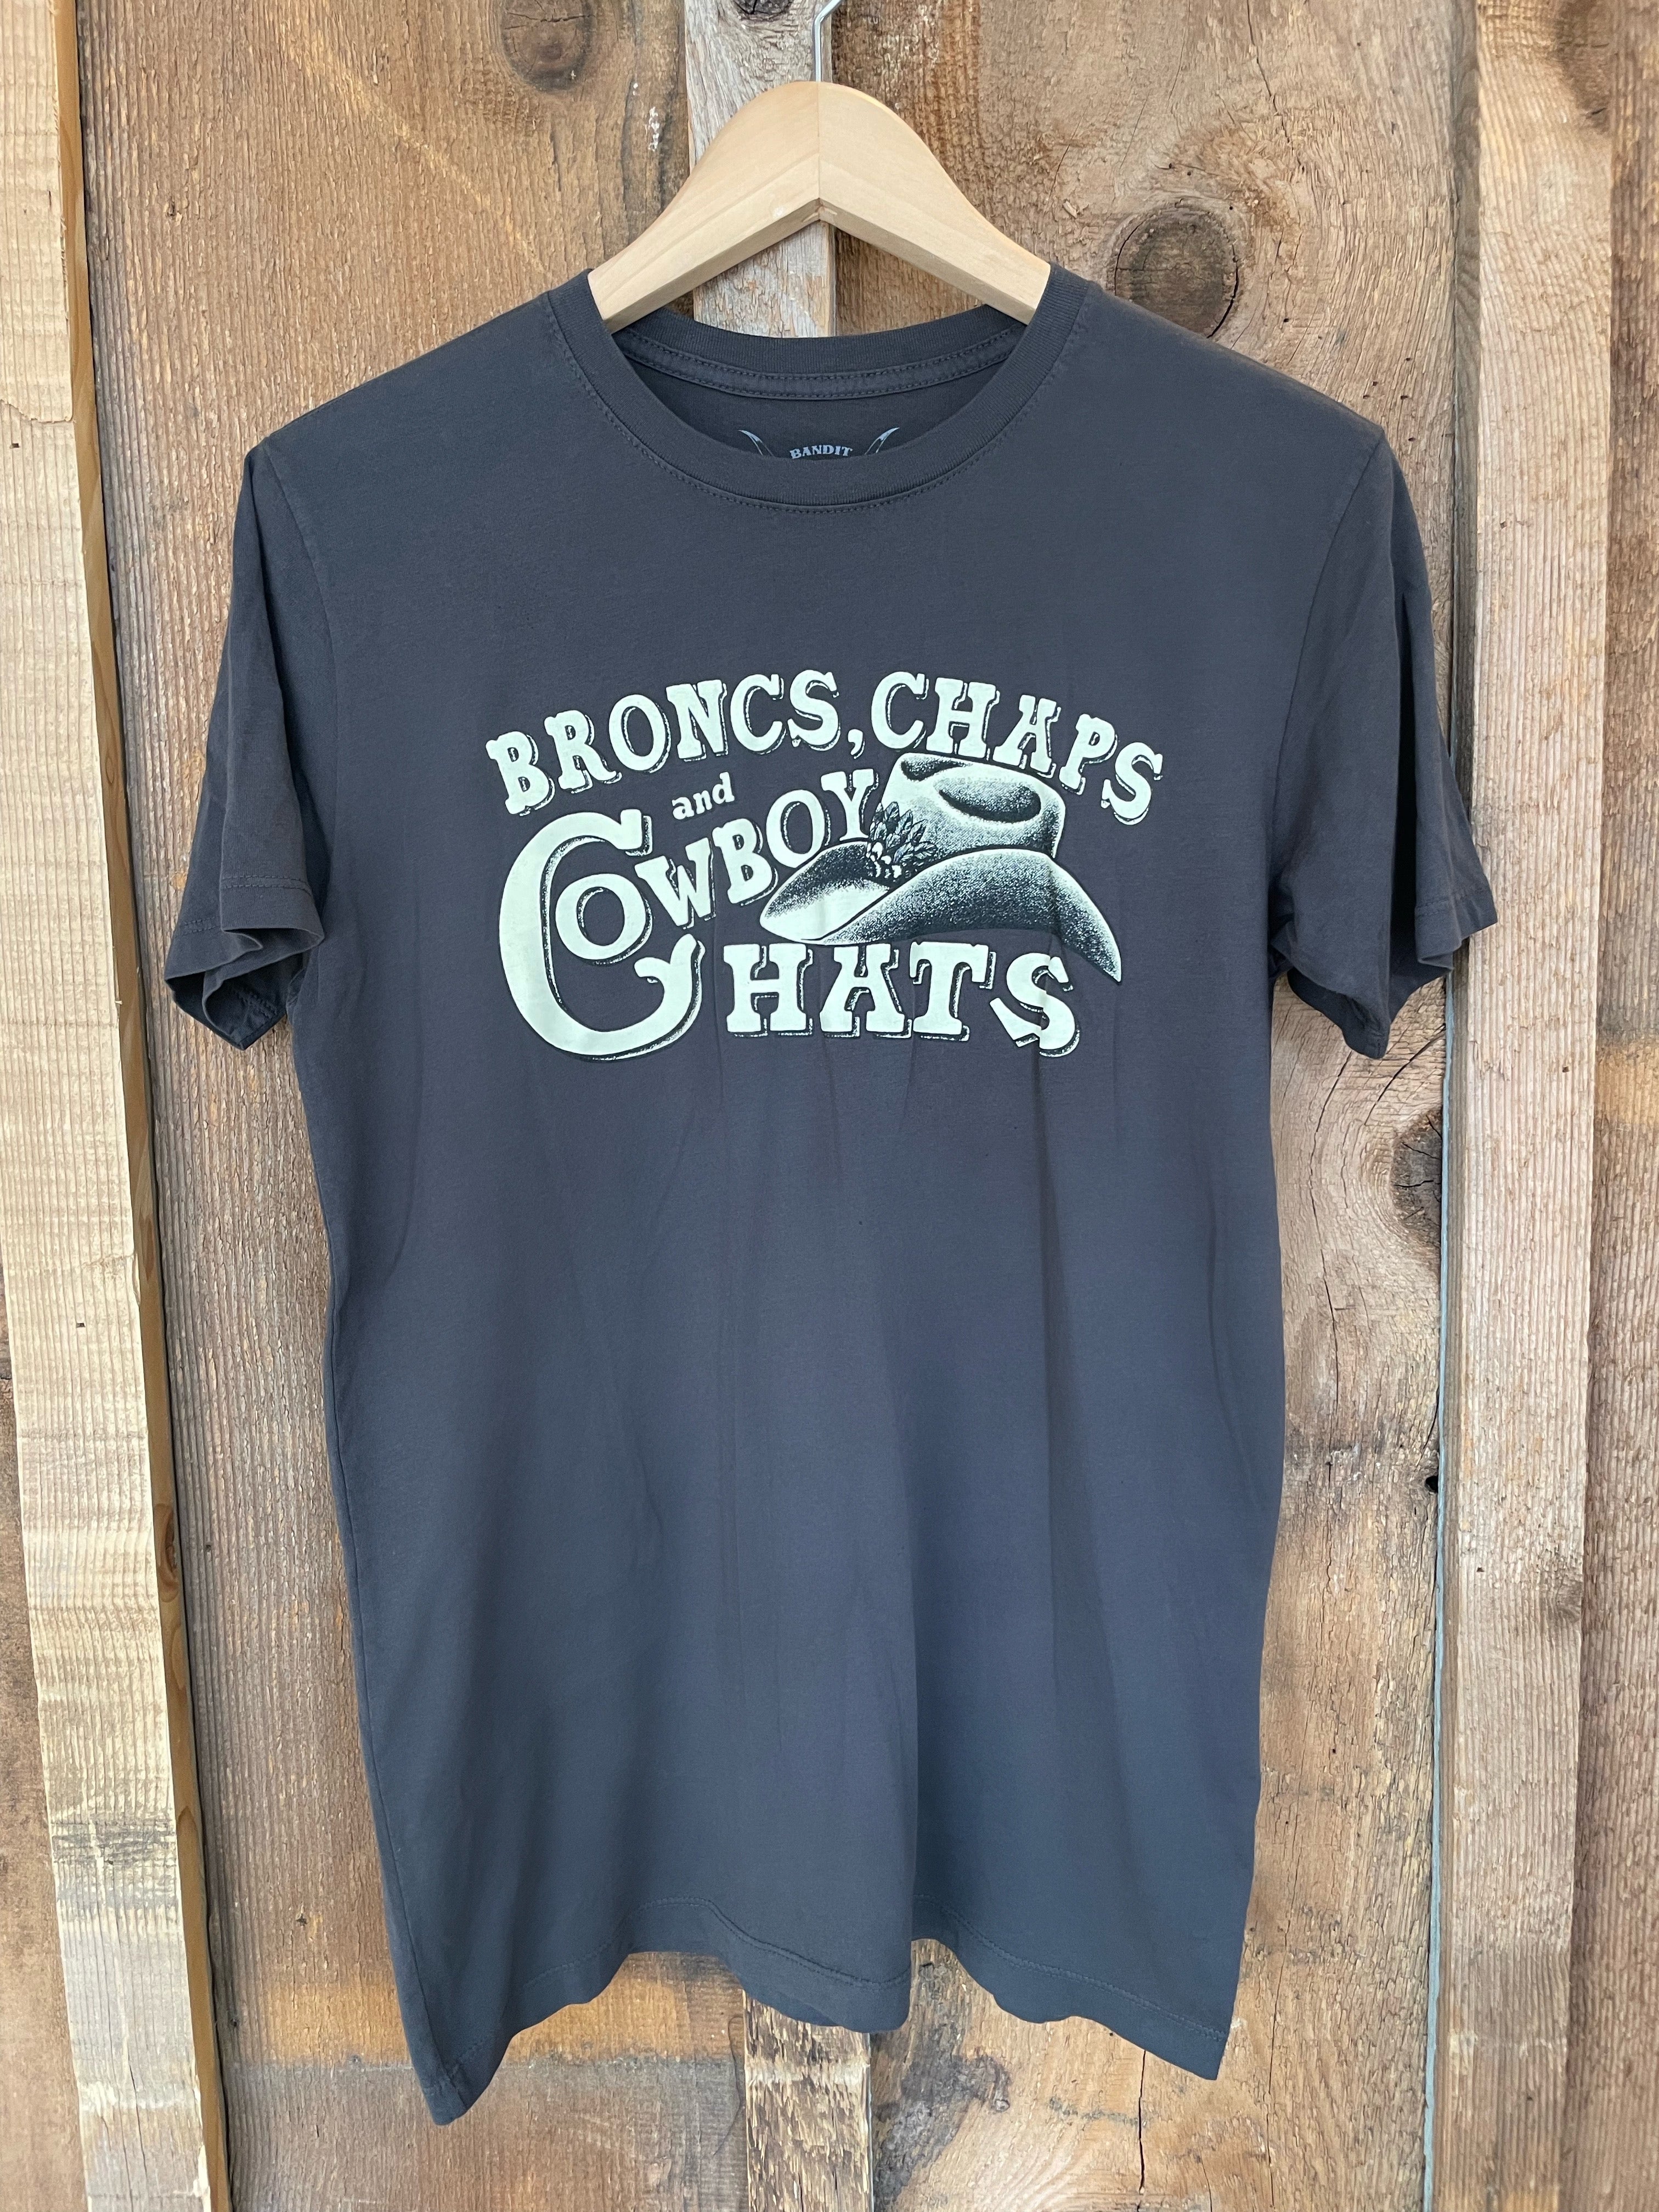 Broncs, Chaps, and Cowboy Hats Mens Tee Blk/White